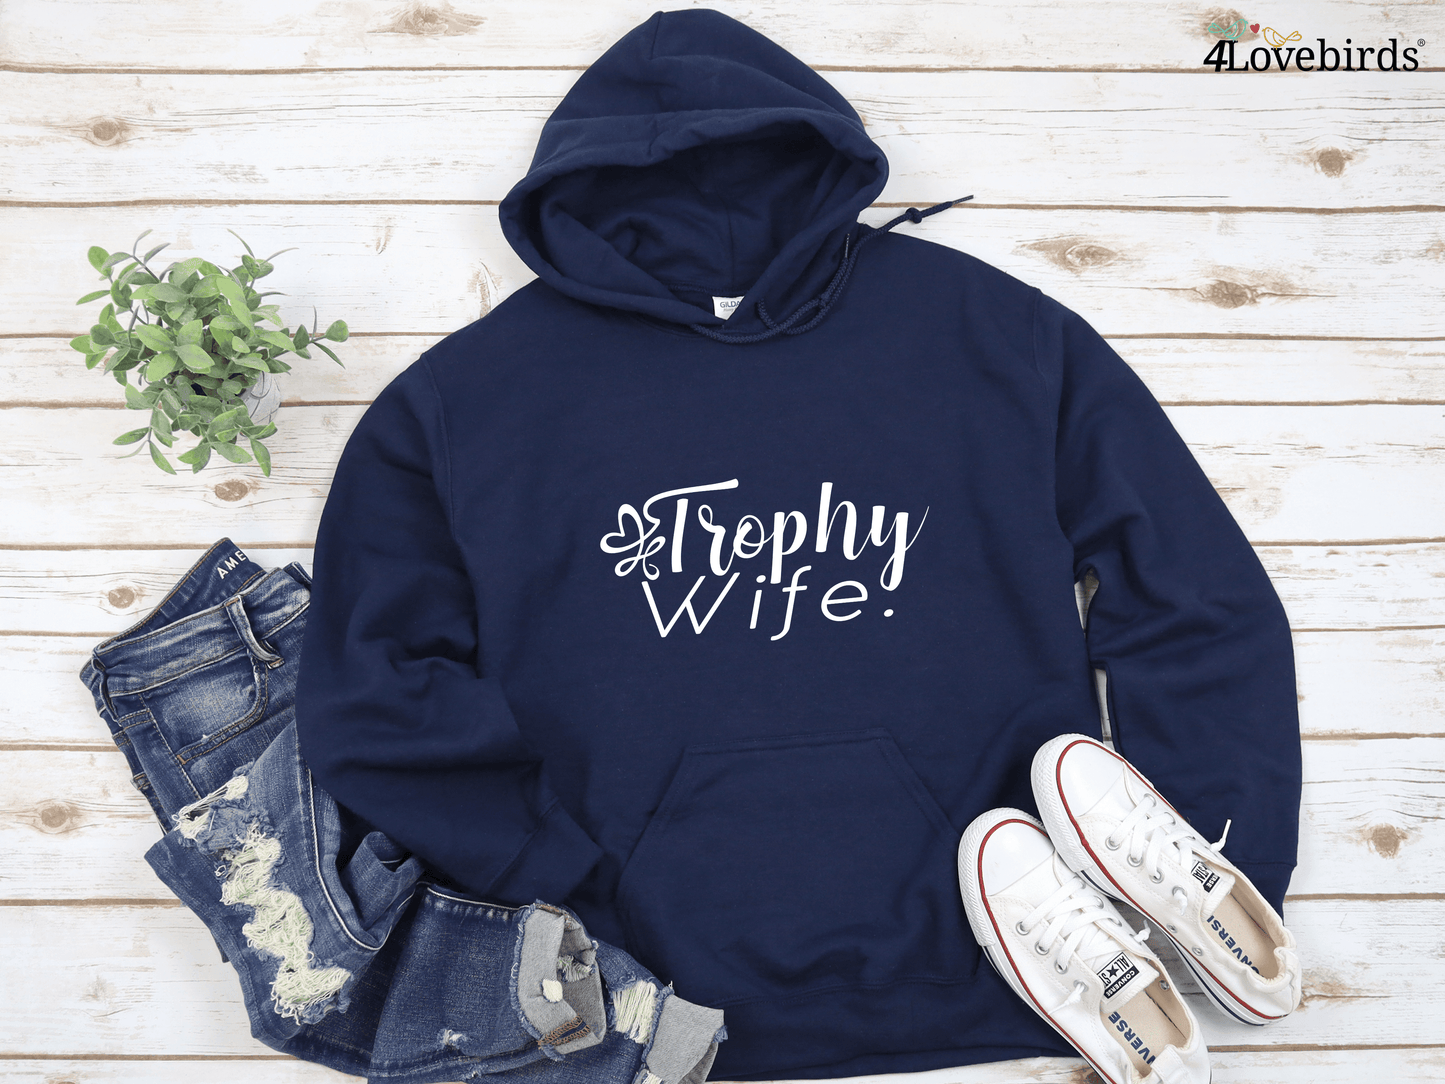 Trophy Wife T-Shirt, Wife Hoodies, Wife Gifts, Valentine's Day Sweatshirts, Anniversary Gift - 4Lovebirds